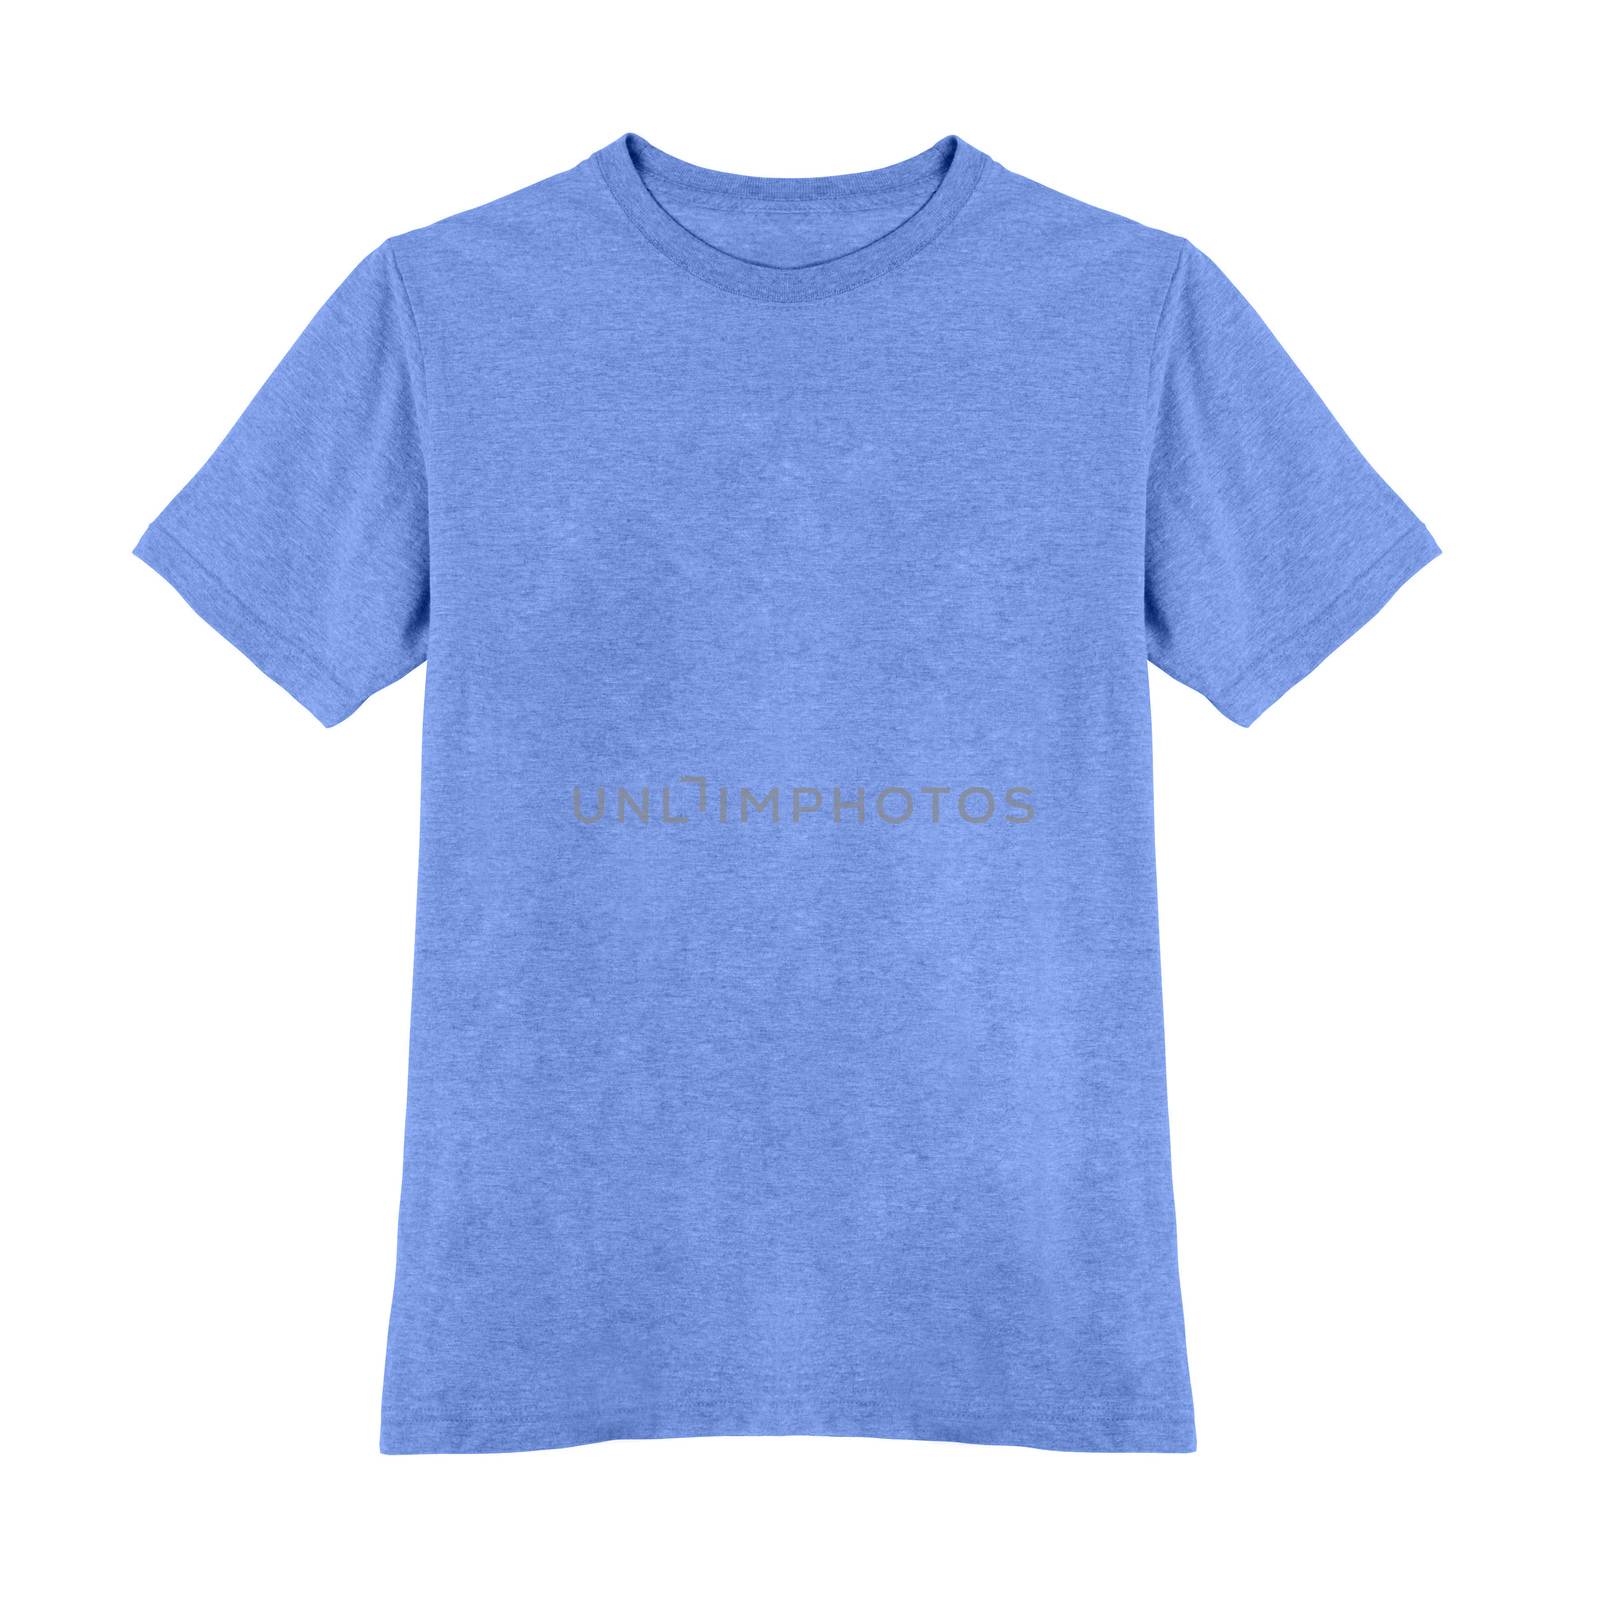 blue tshirt isolated on white by ozaiachin